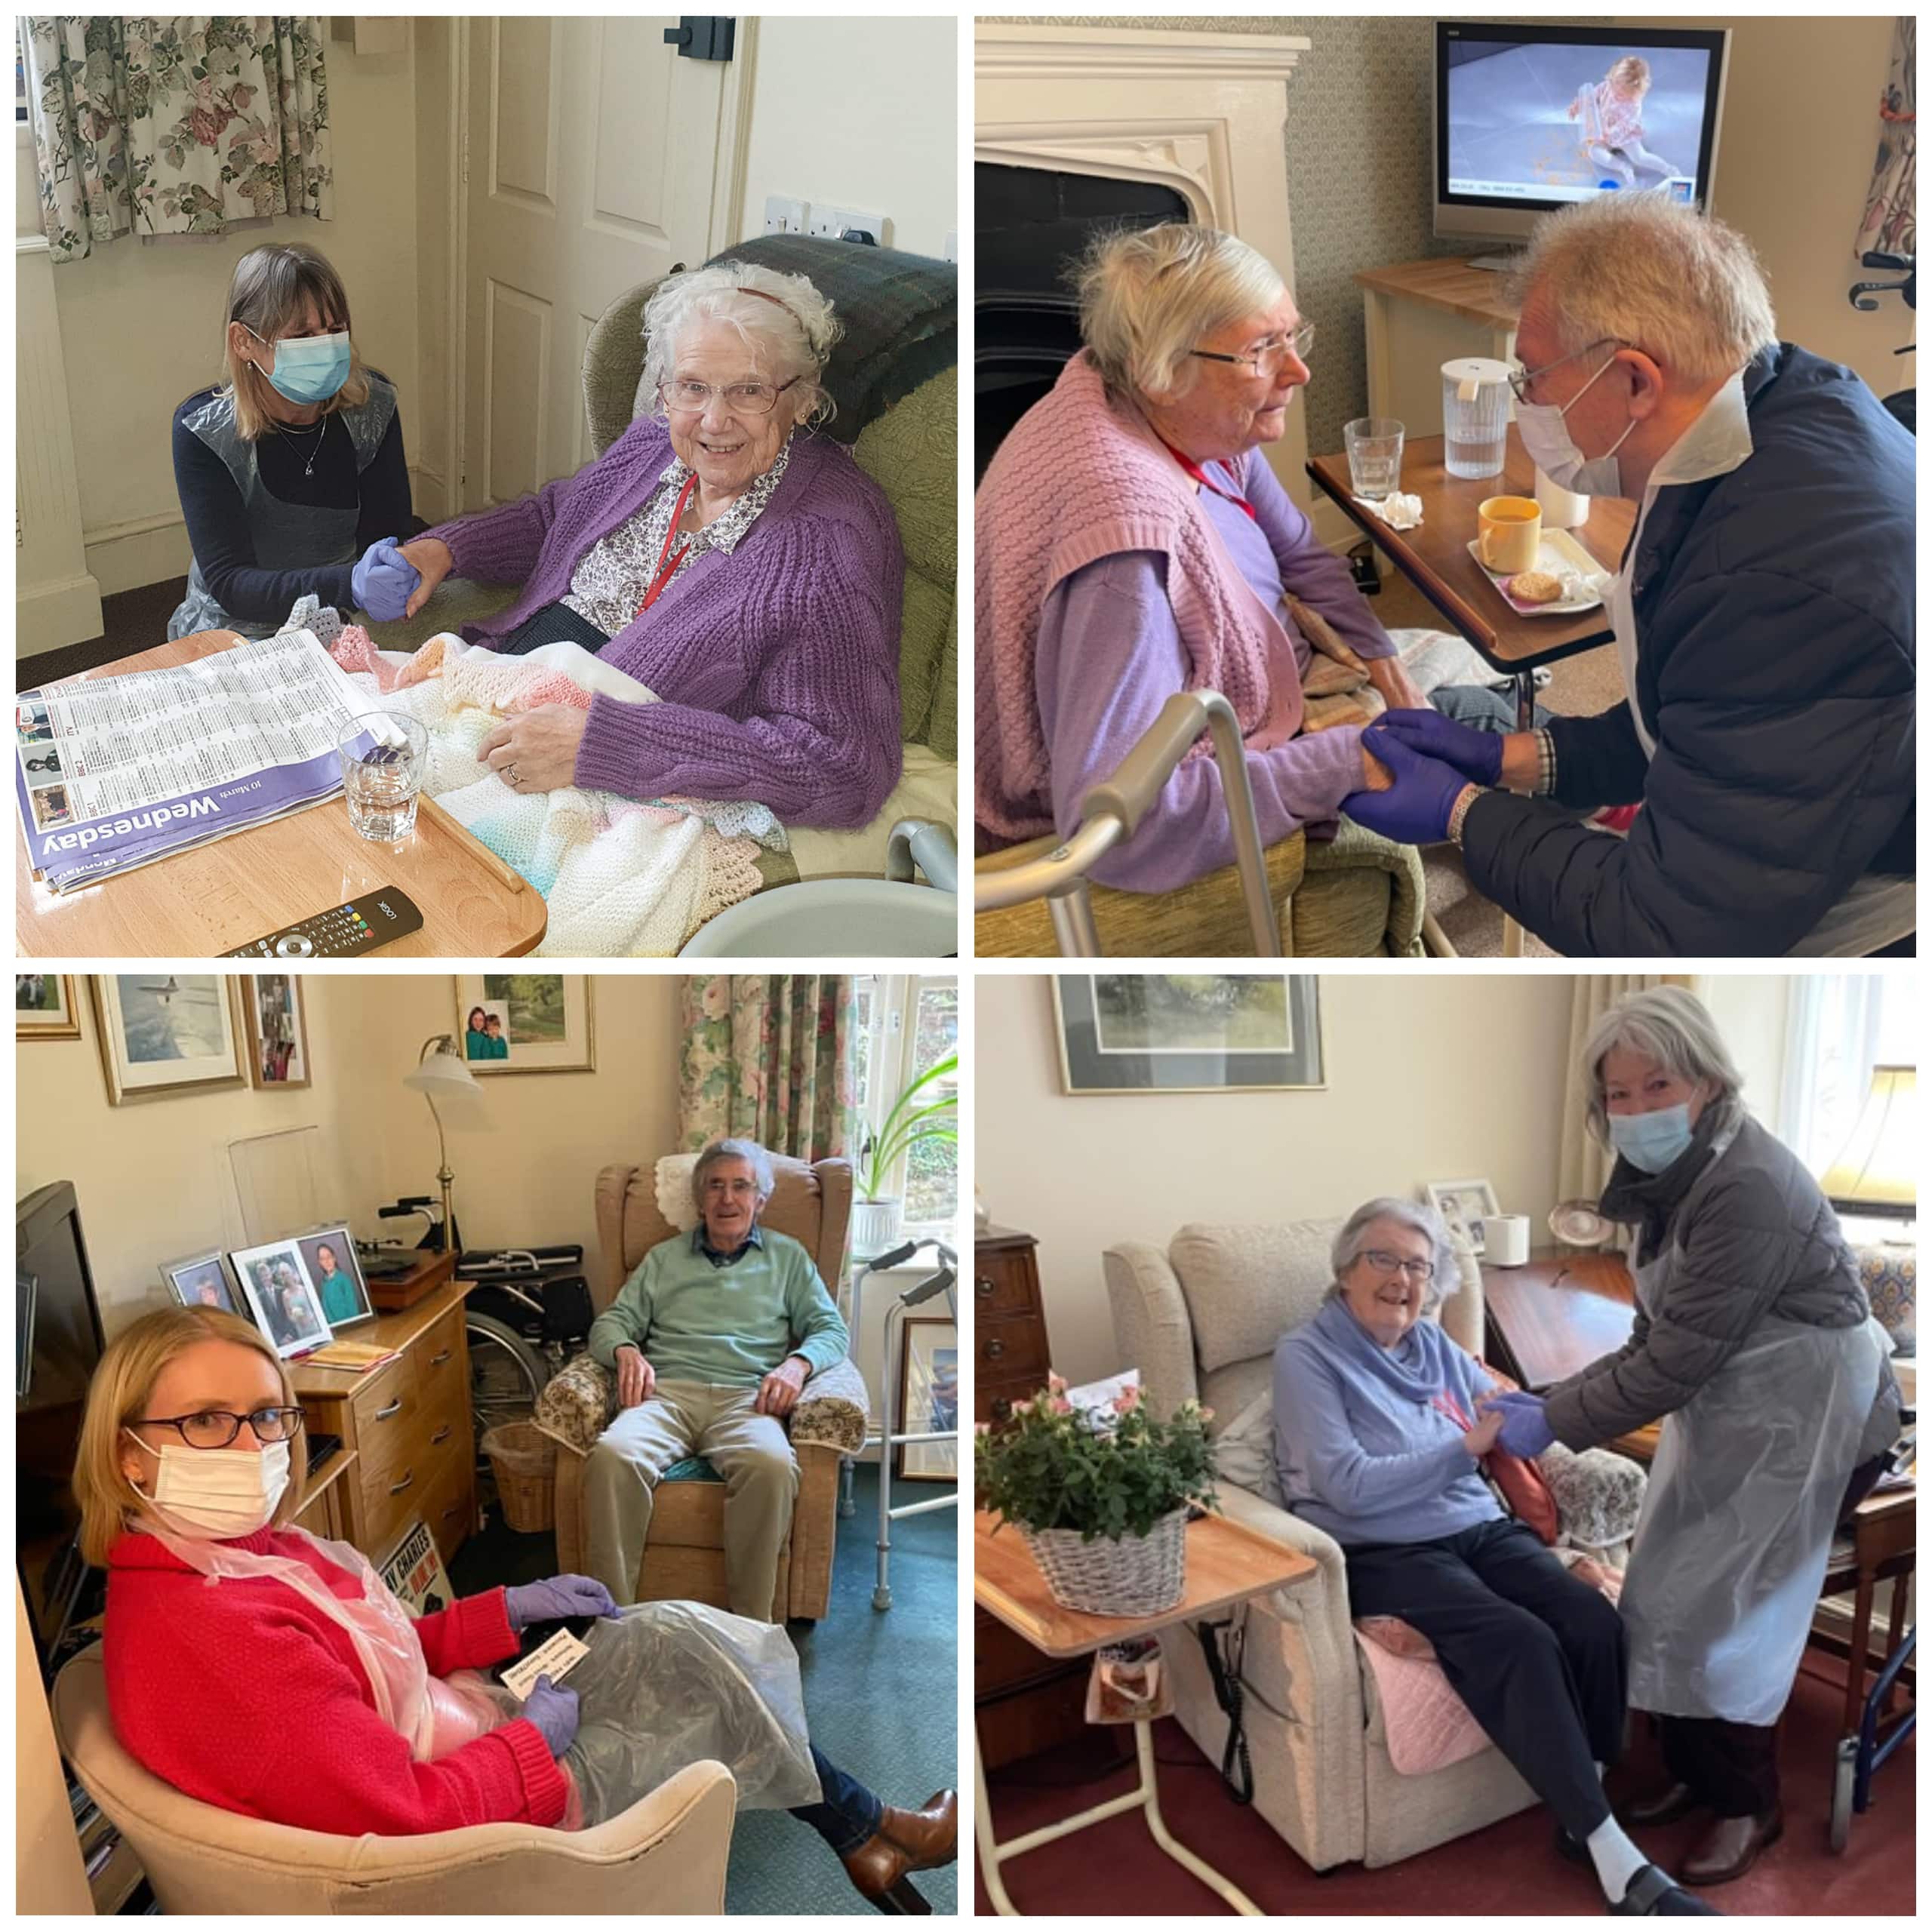 Residents at Featherton House Care Home in Deddington reunited with their designated visitors inside the home.